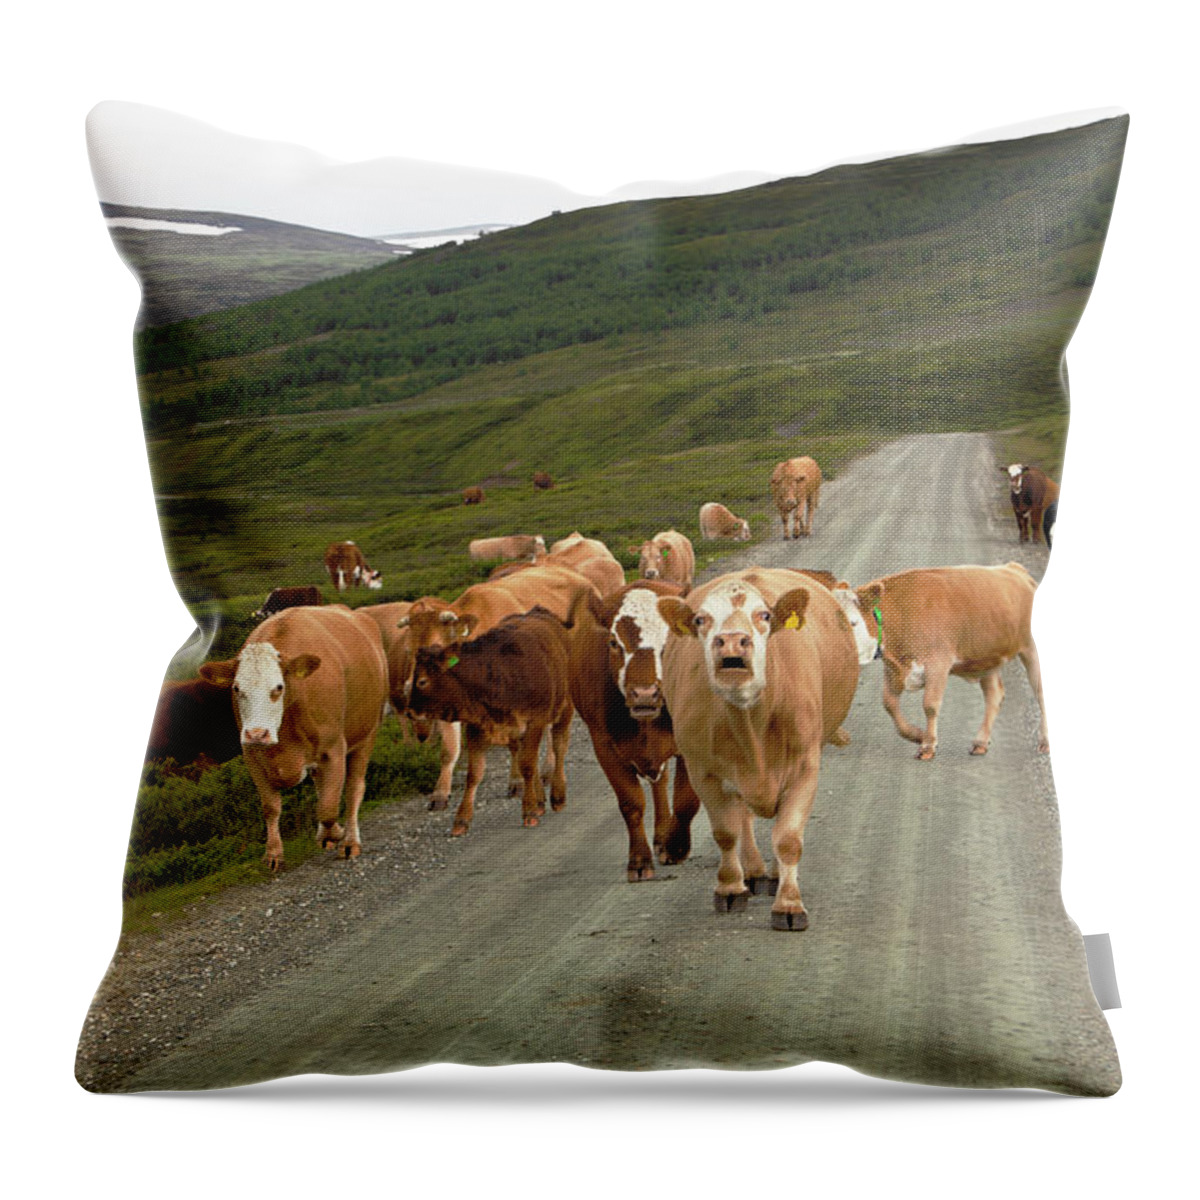 Non-urban Scene Throw Pillow featuring the photograph Cattle In The Mountains by Ekely